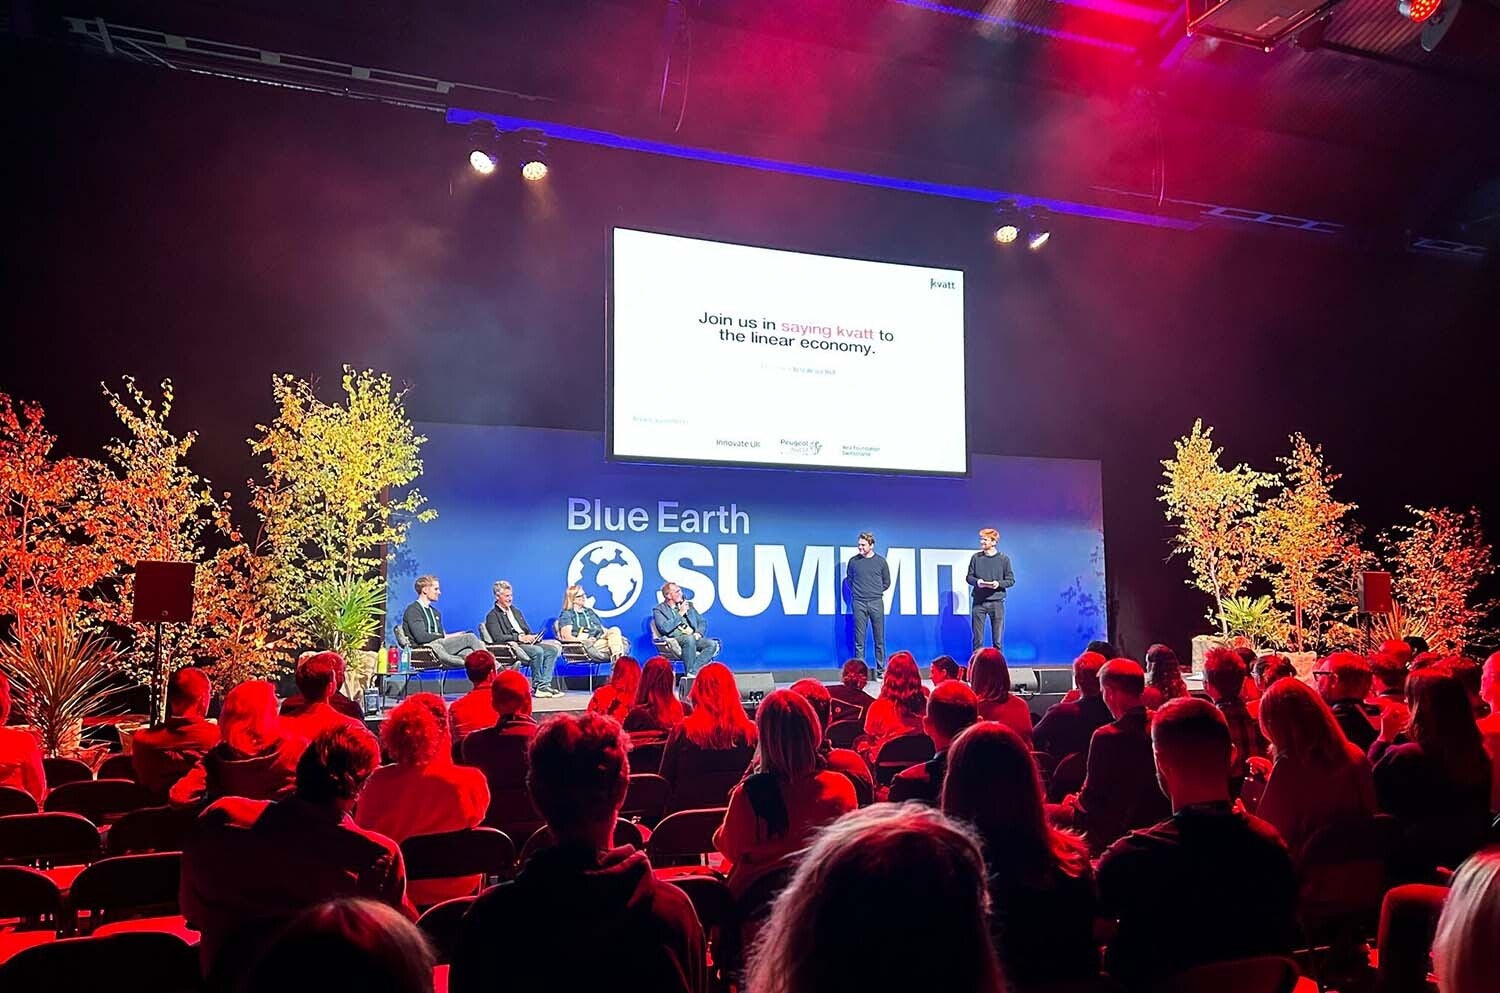 Kvatt pitching on stage at Blue Earth Summit, 2022